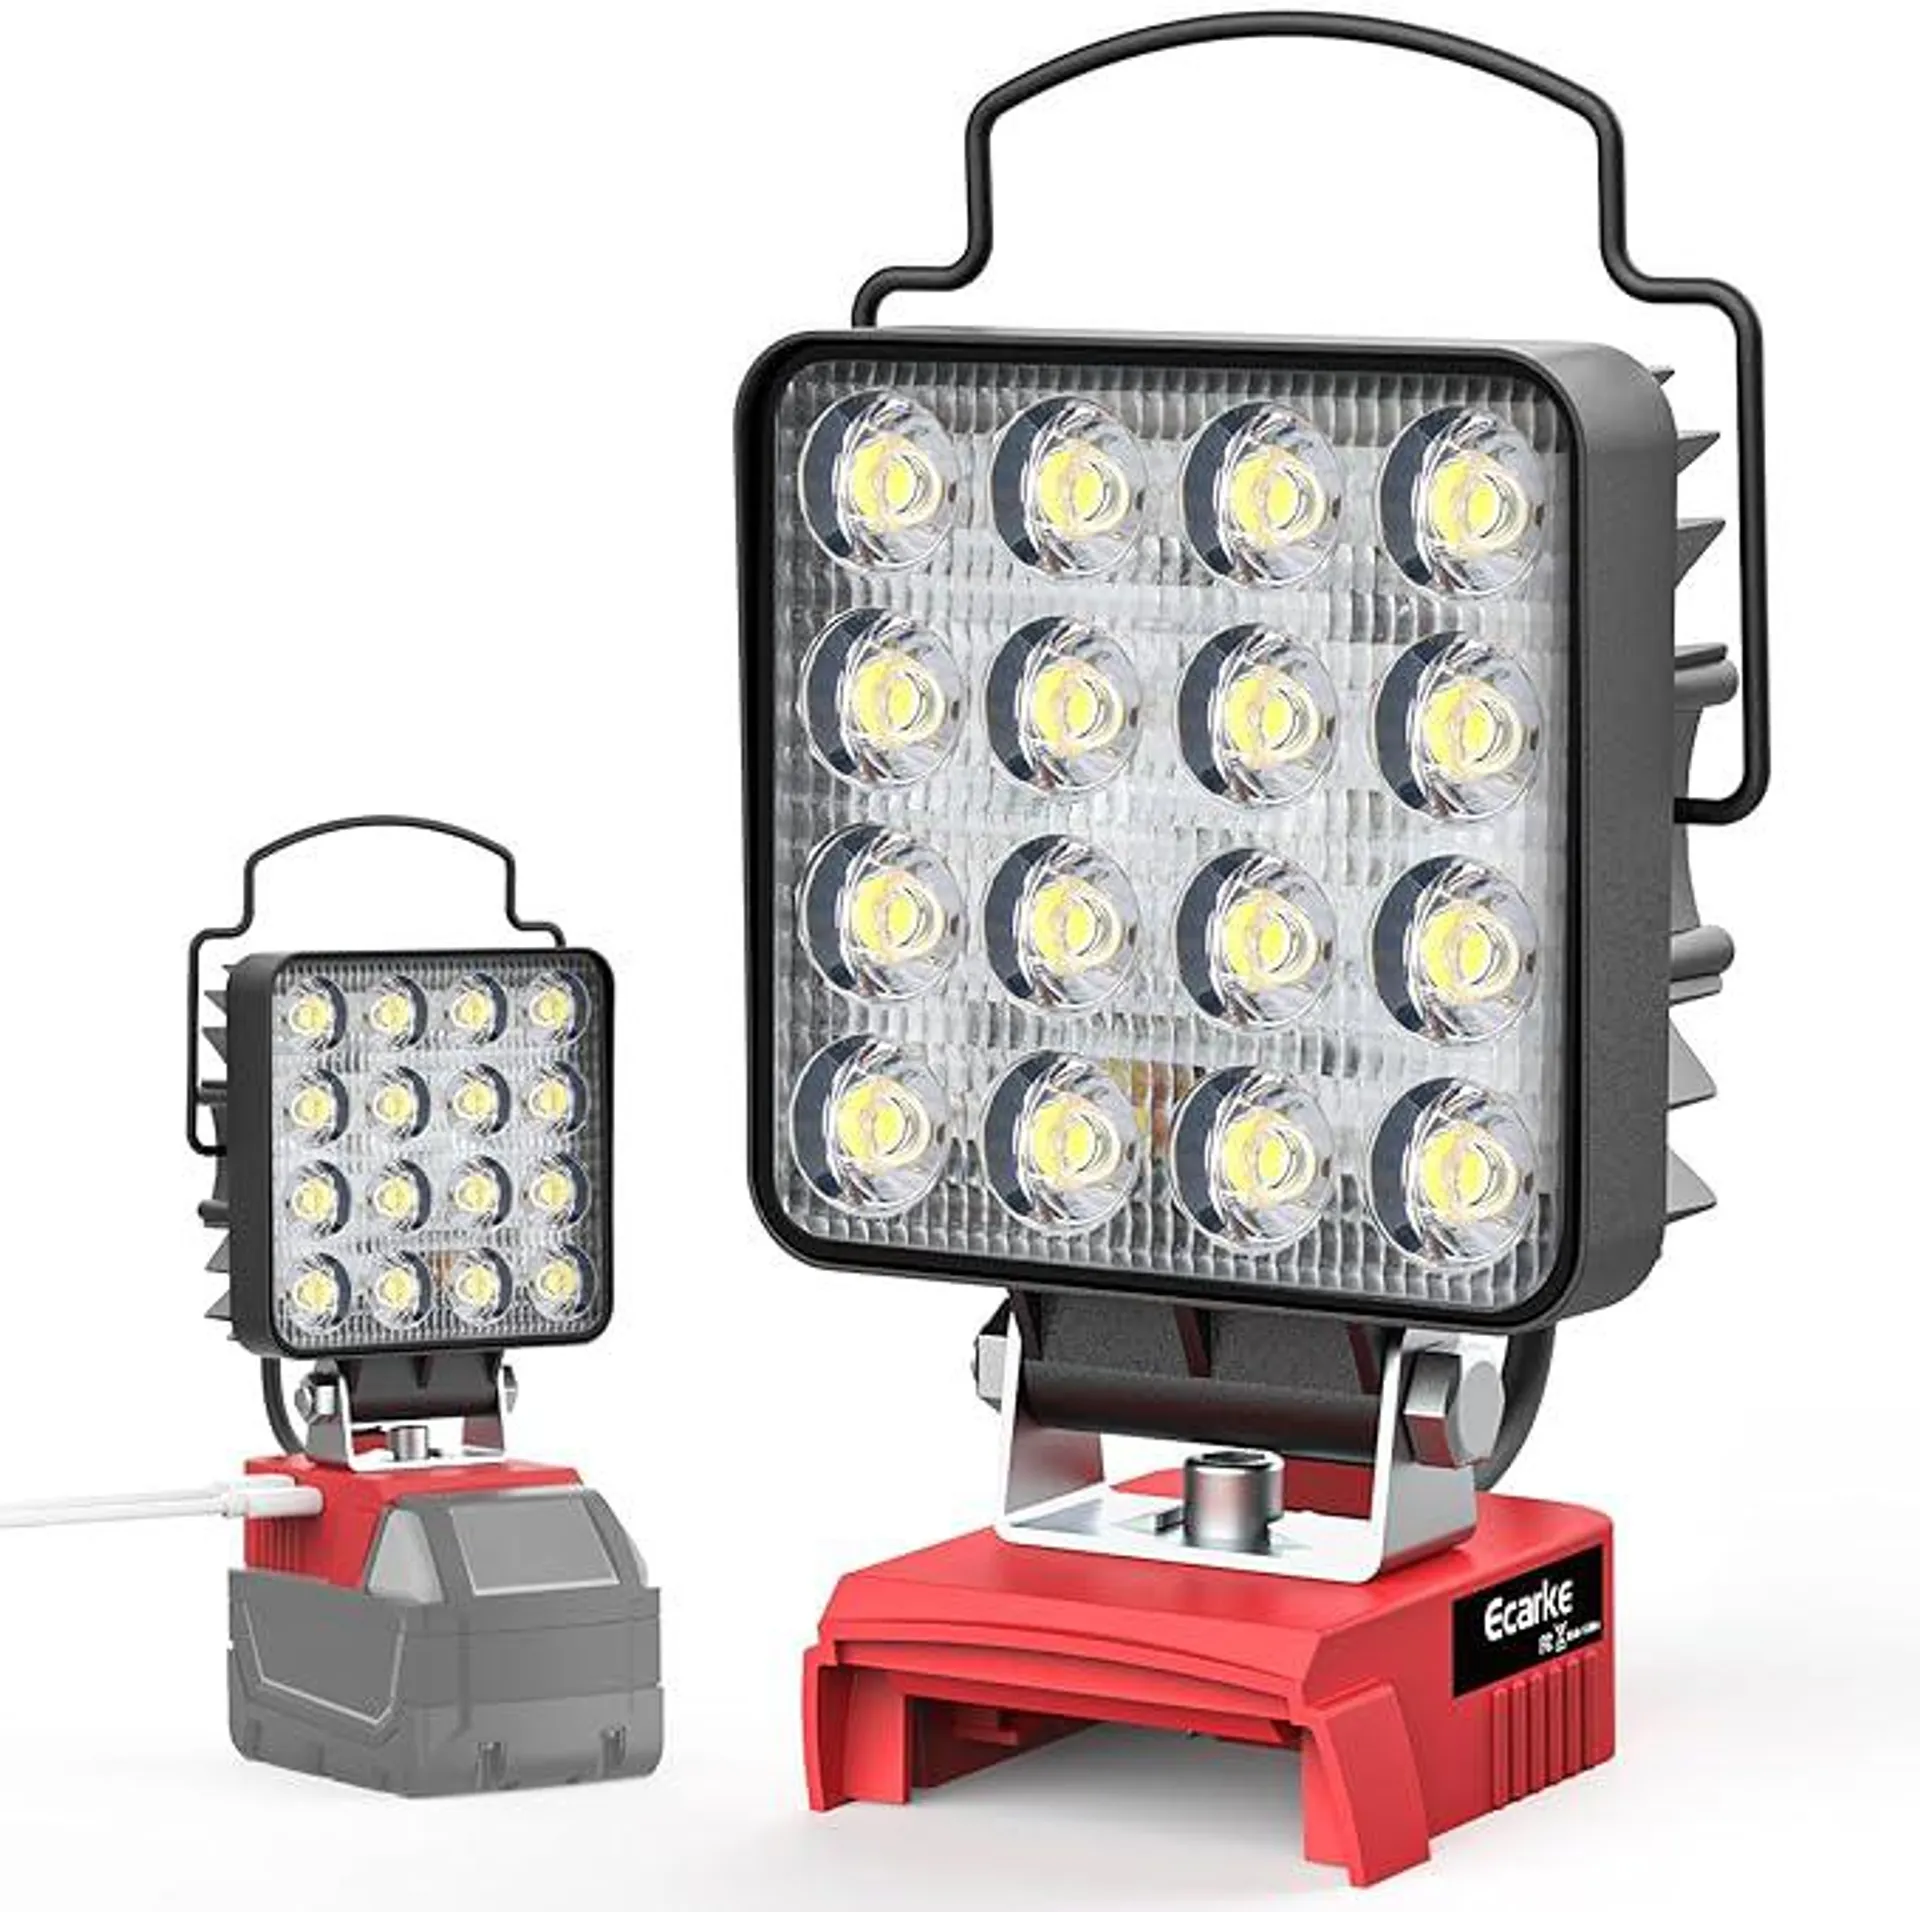 LED Work Light for Milwaukee m18 Battery,Ecarke 48W 2900LM for Milwaukee Light m18 Work Light,USB Work Light 18V Battery Light with Low Voltage Protection & USB&Type-C Charging Port（Tool Only）